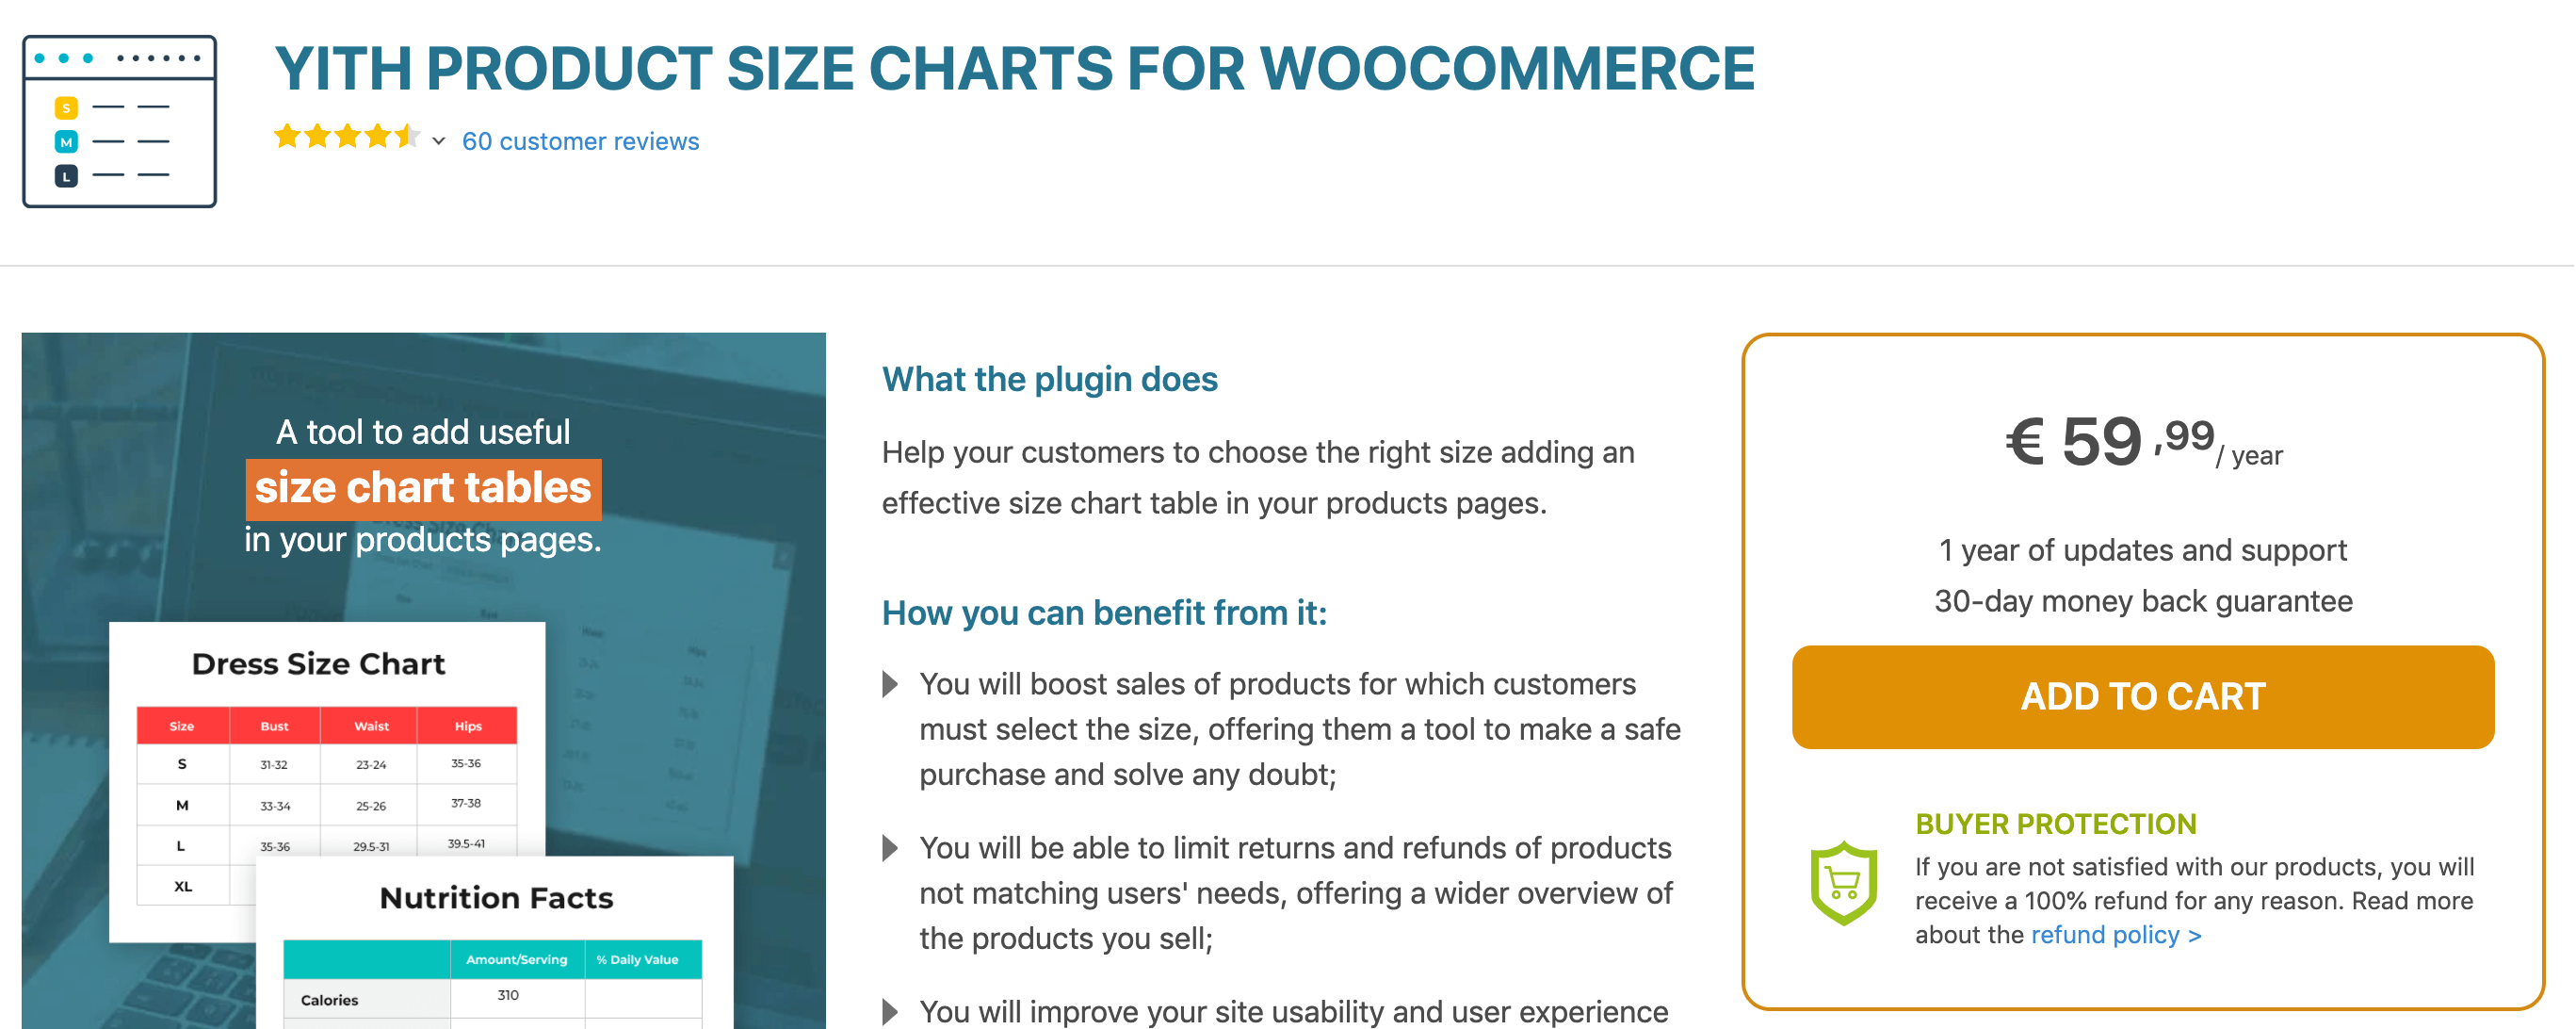 YITH Product Size Charts for WooCommerce